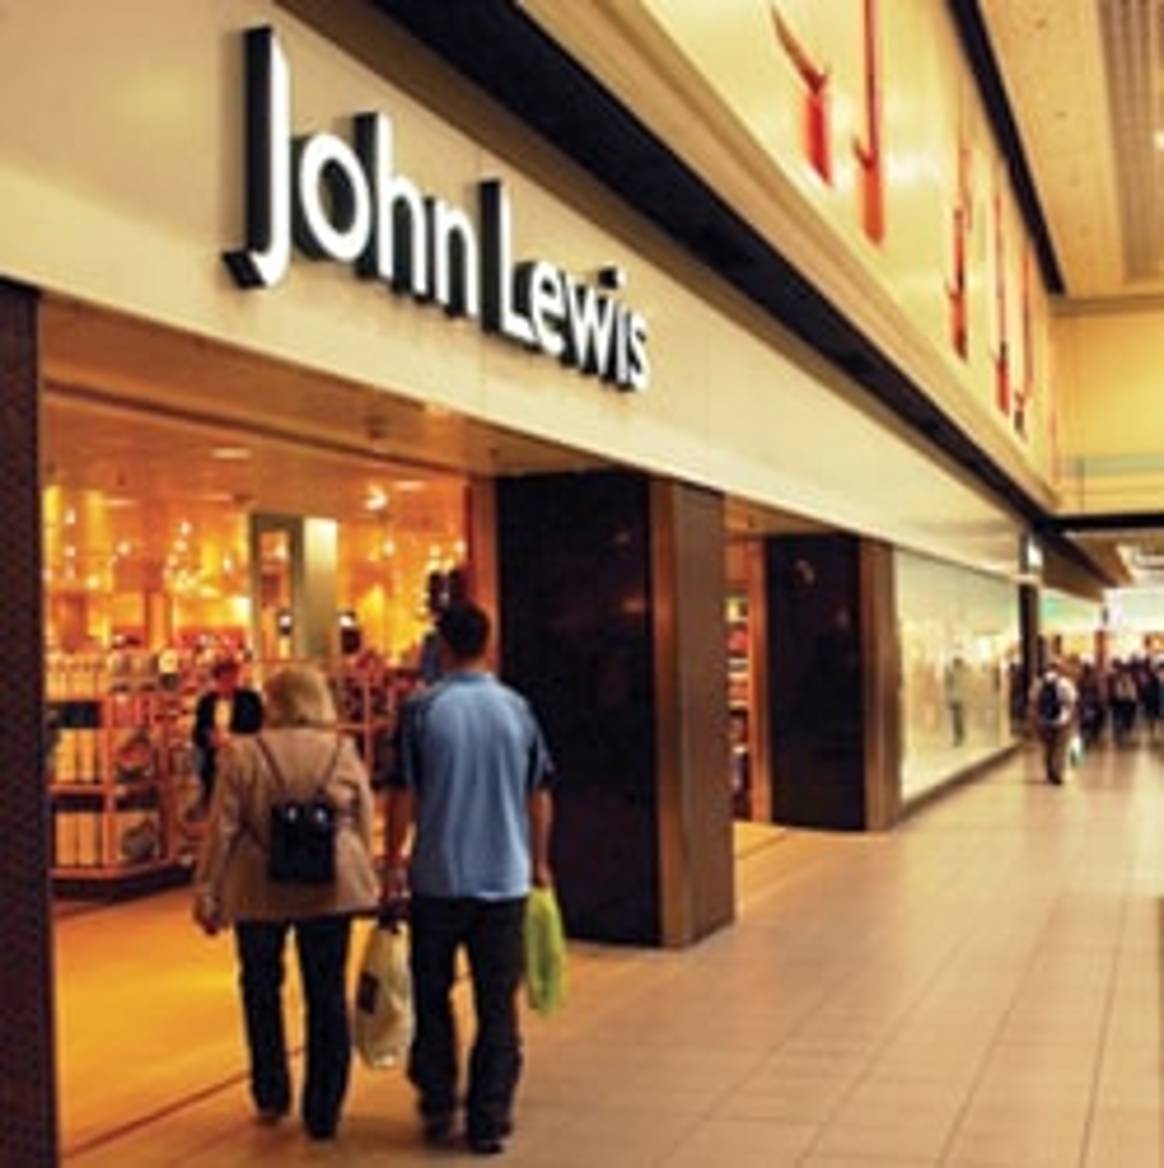 John Lewis to open new format in York